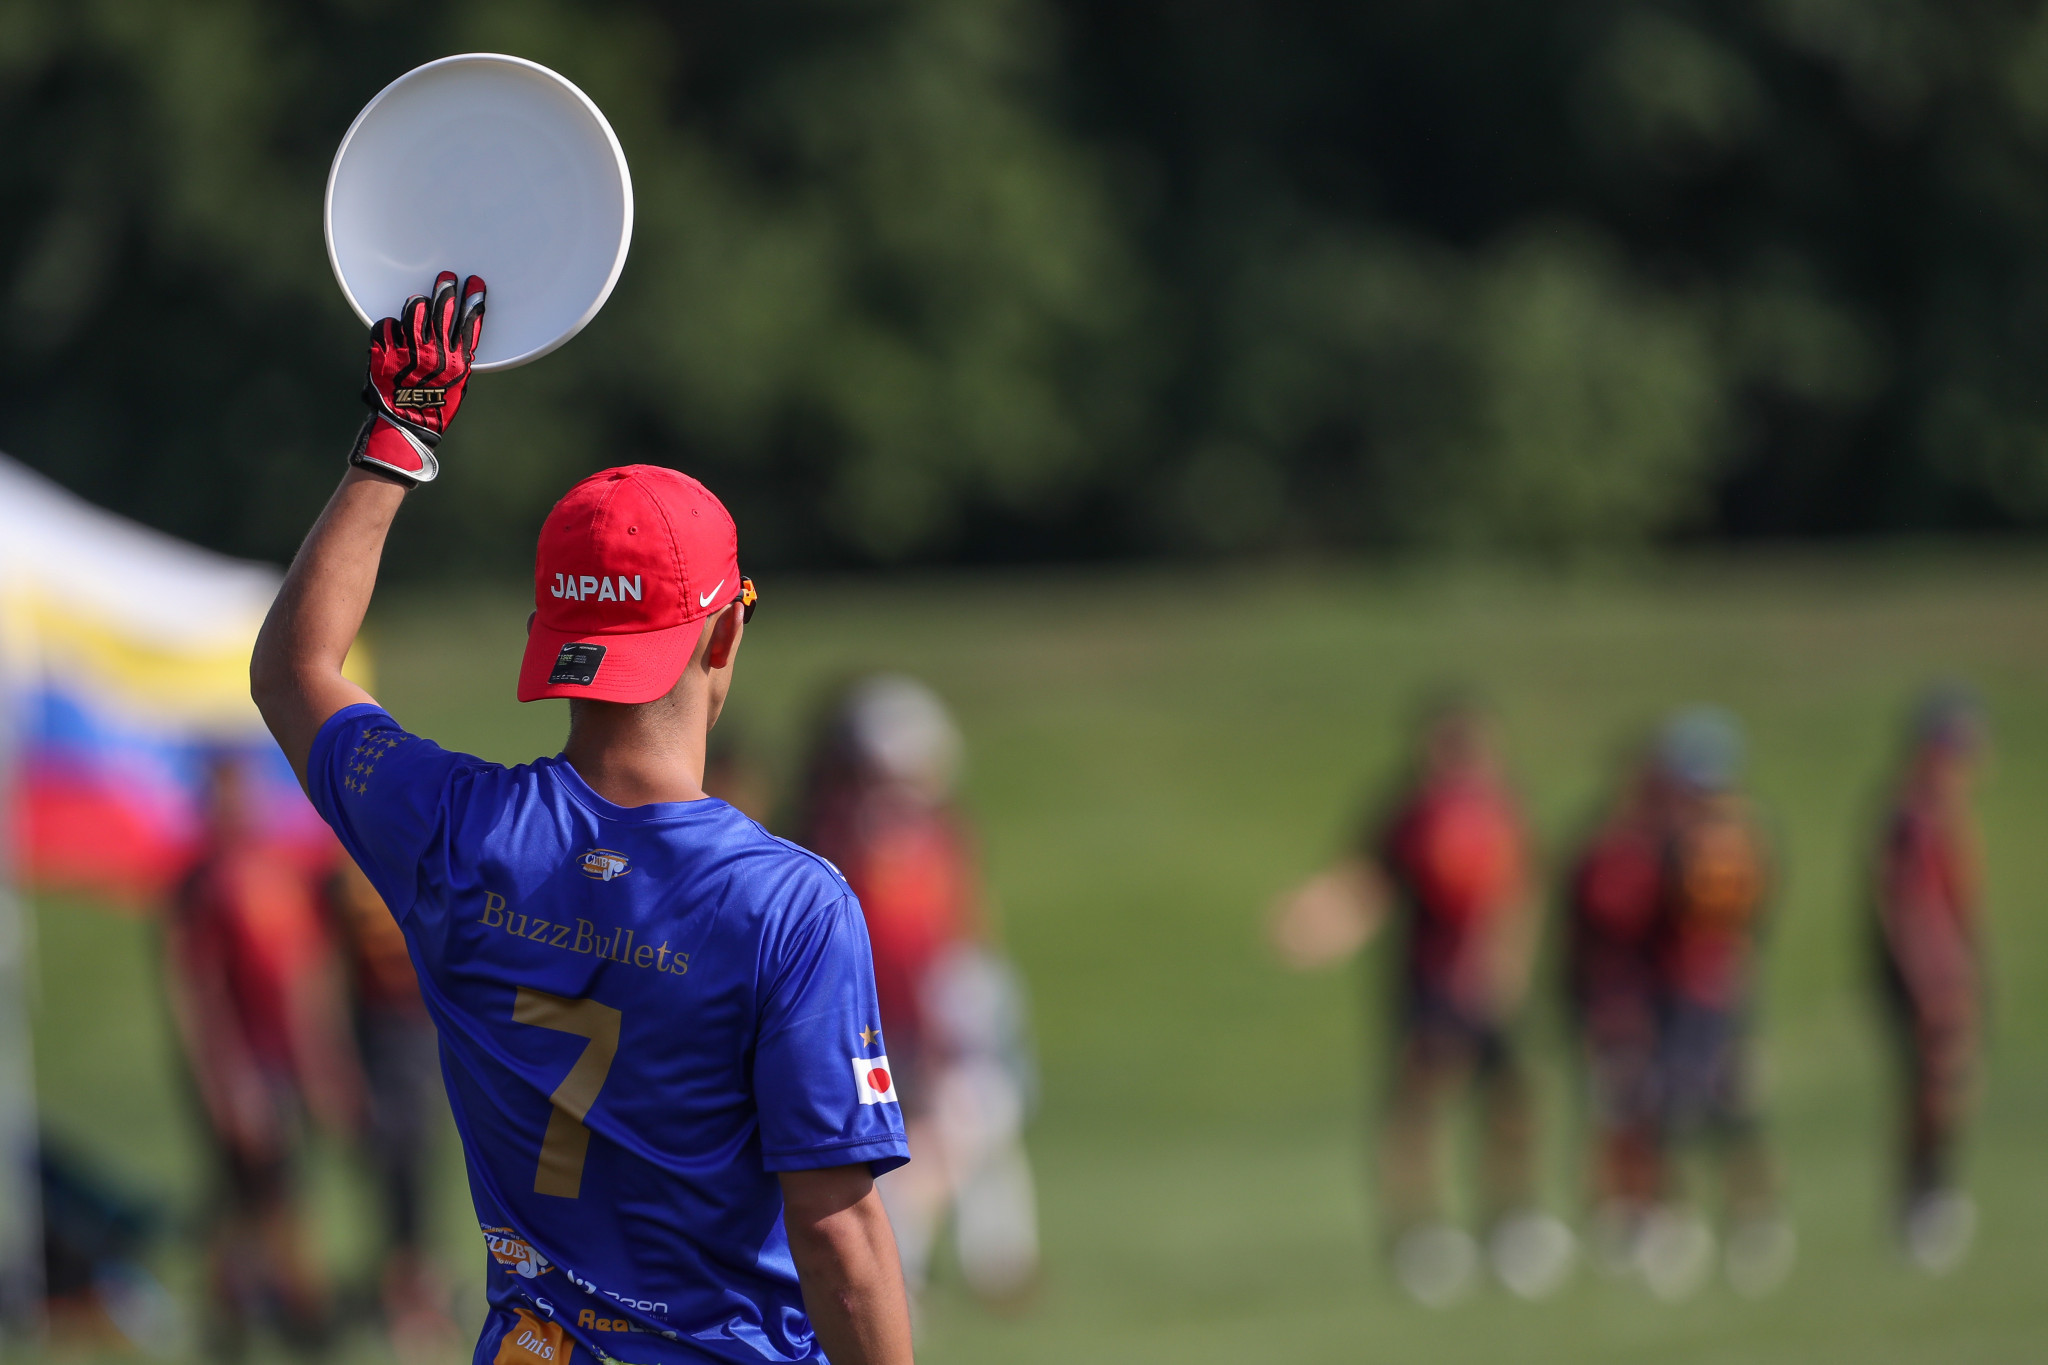 Buzz Bullets earned comfortable wins against Warao Ultimate Venezuela and Freespeed as they look to win the open title ©Paul Rutherford for UltiPhotos